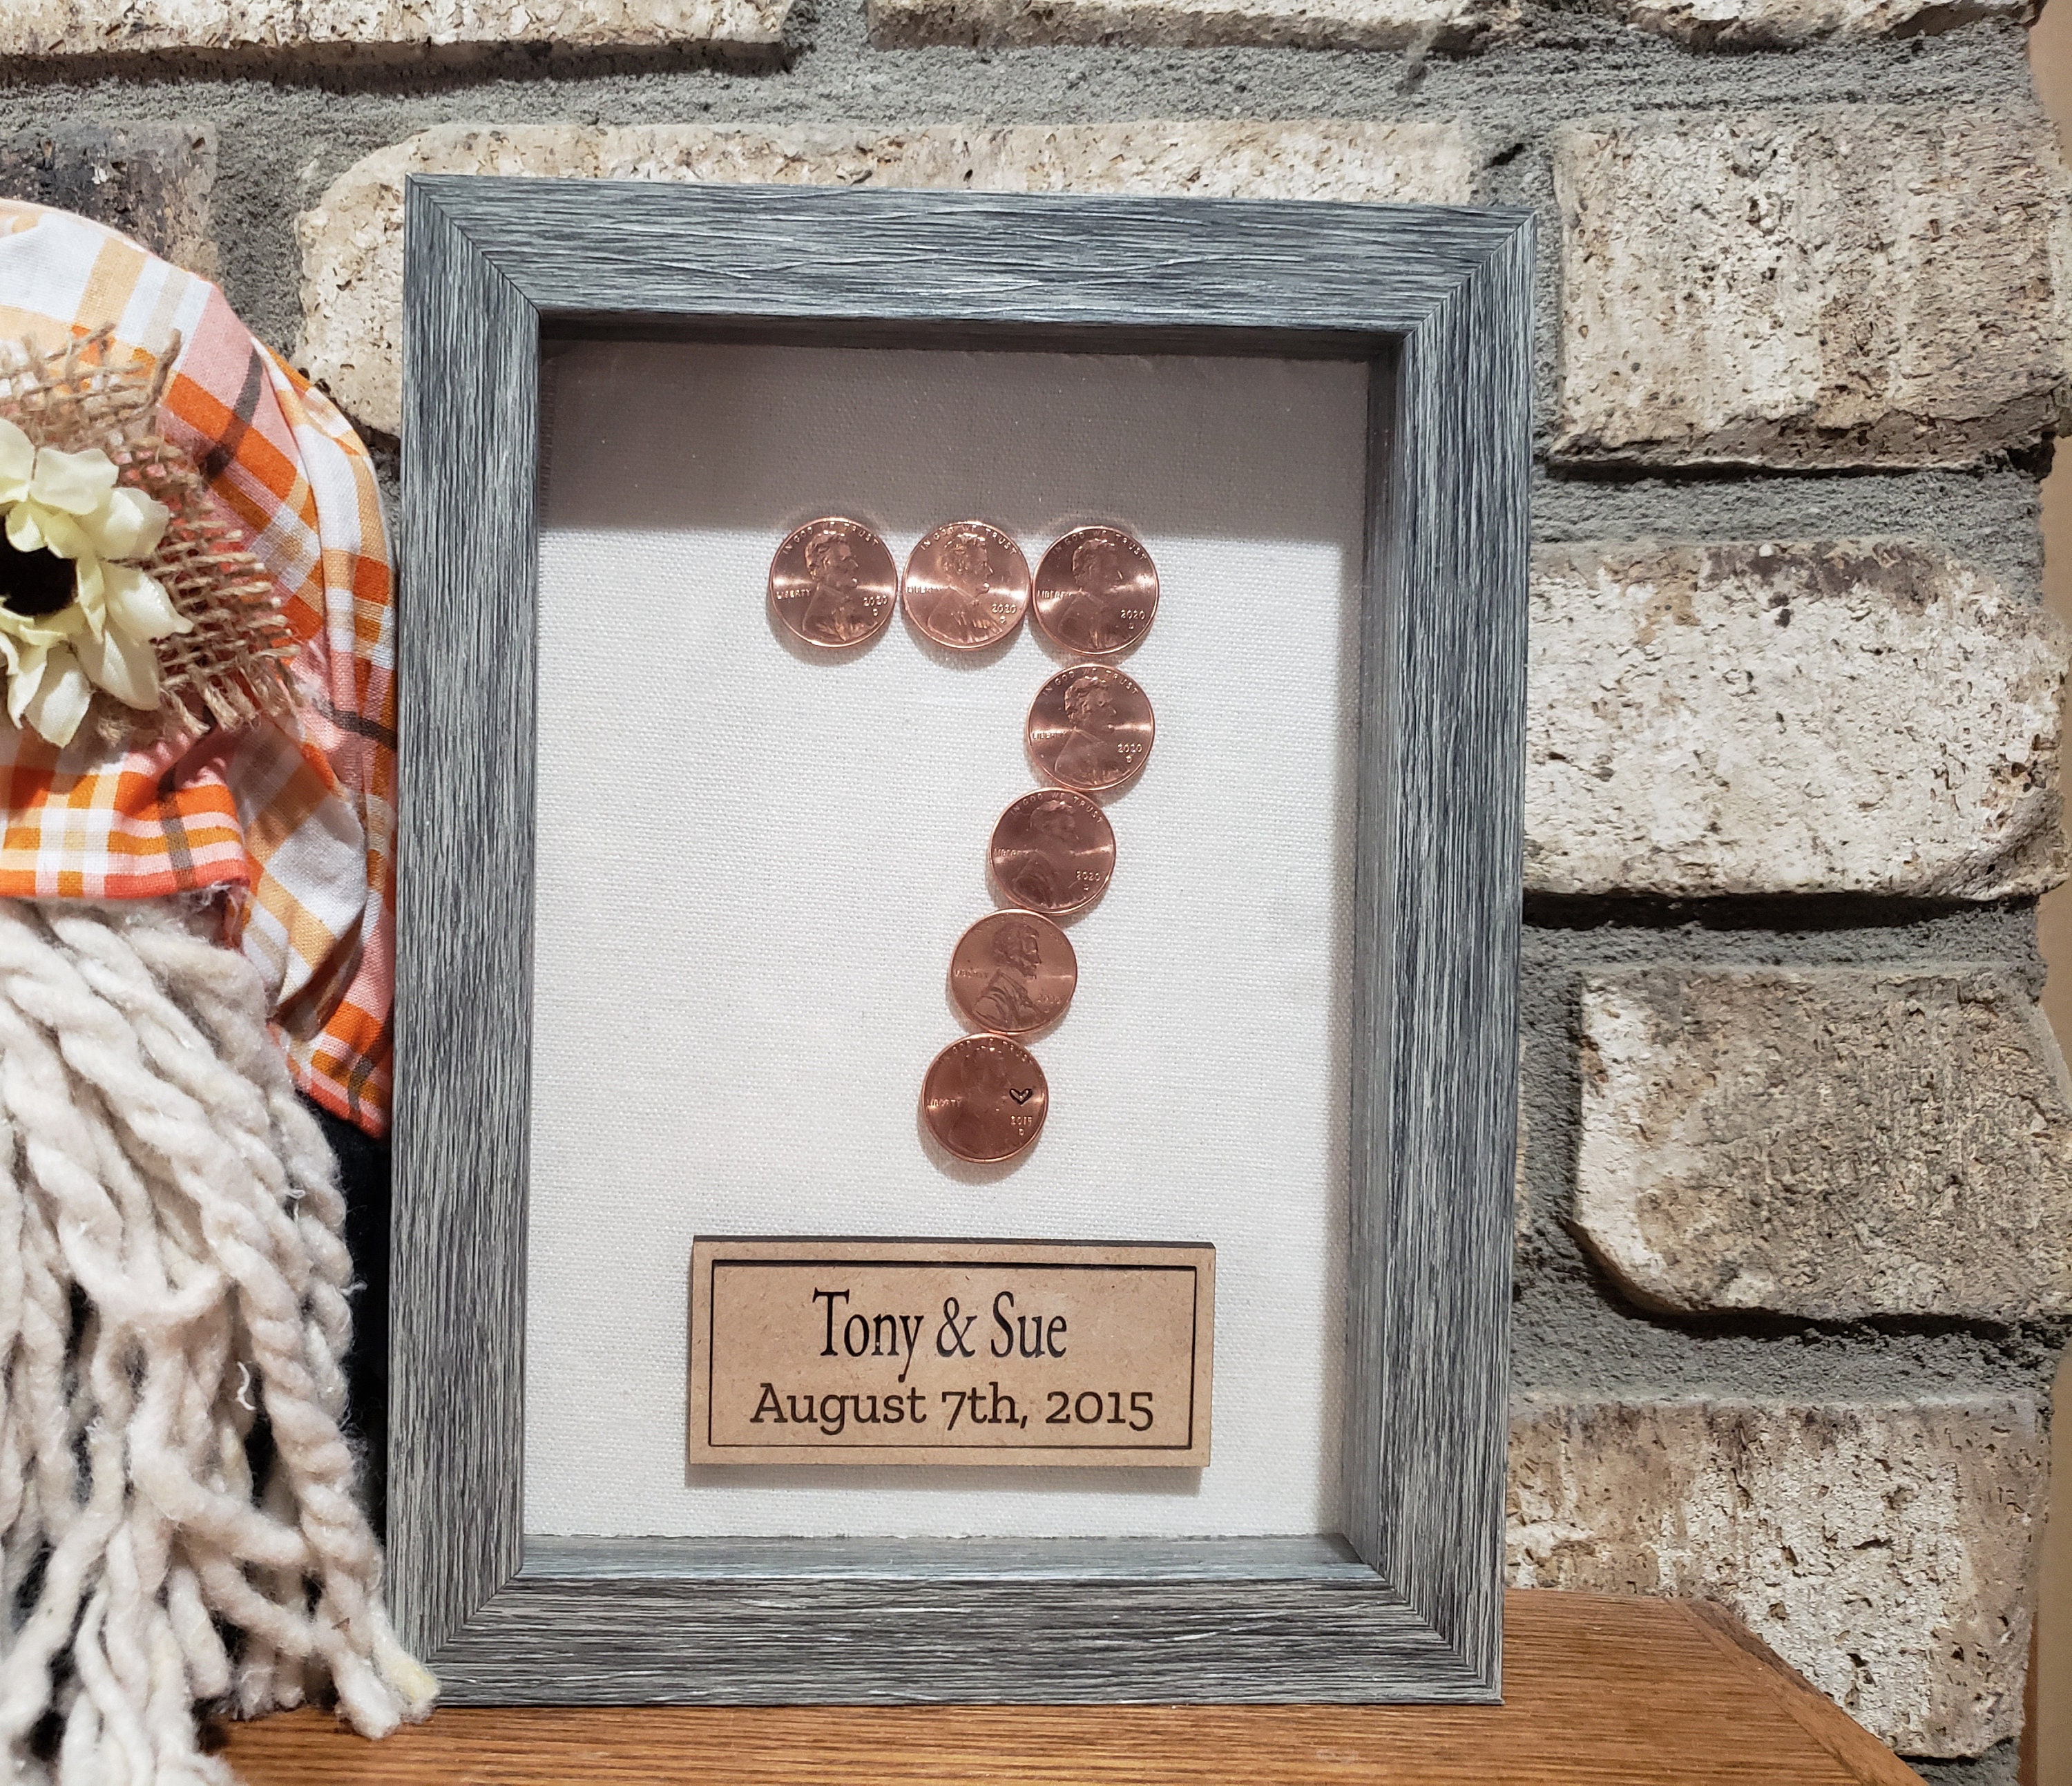  Personalized Names 7 Year Copper Anniversary Gifts for Him or  Her, 7th Wool Wedding Anniversary Gifts for Husband Wife Couple, Custom  Wooden Ornament for Christmas Tree, Cute Wood Decorations : Handmade